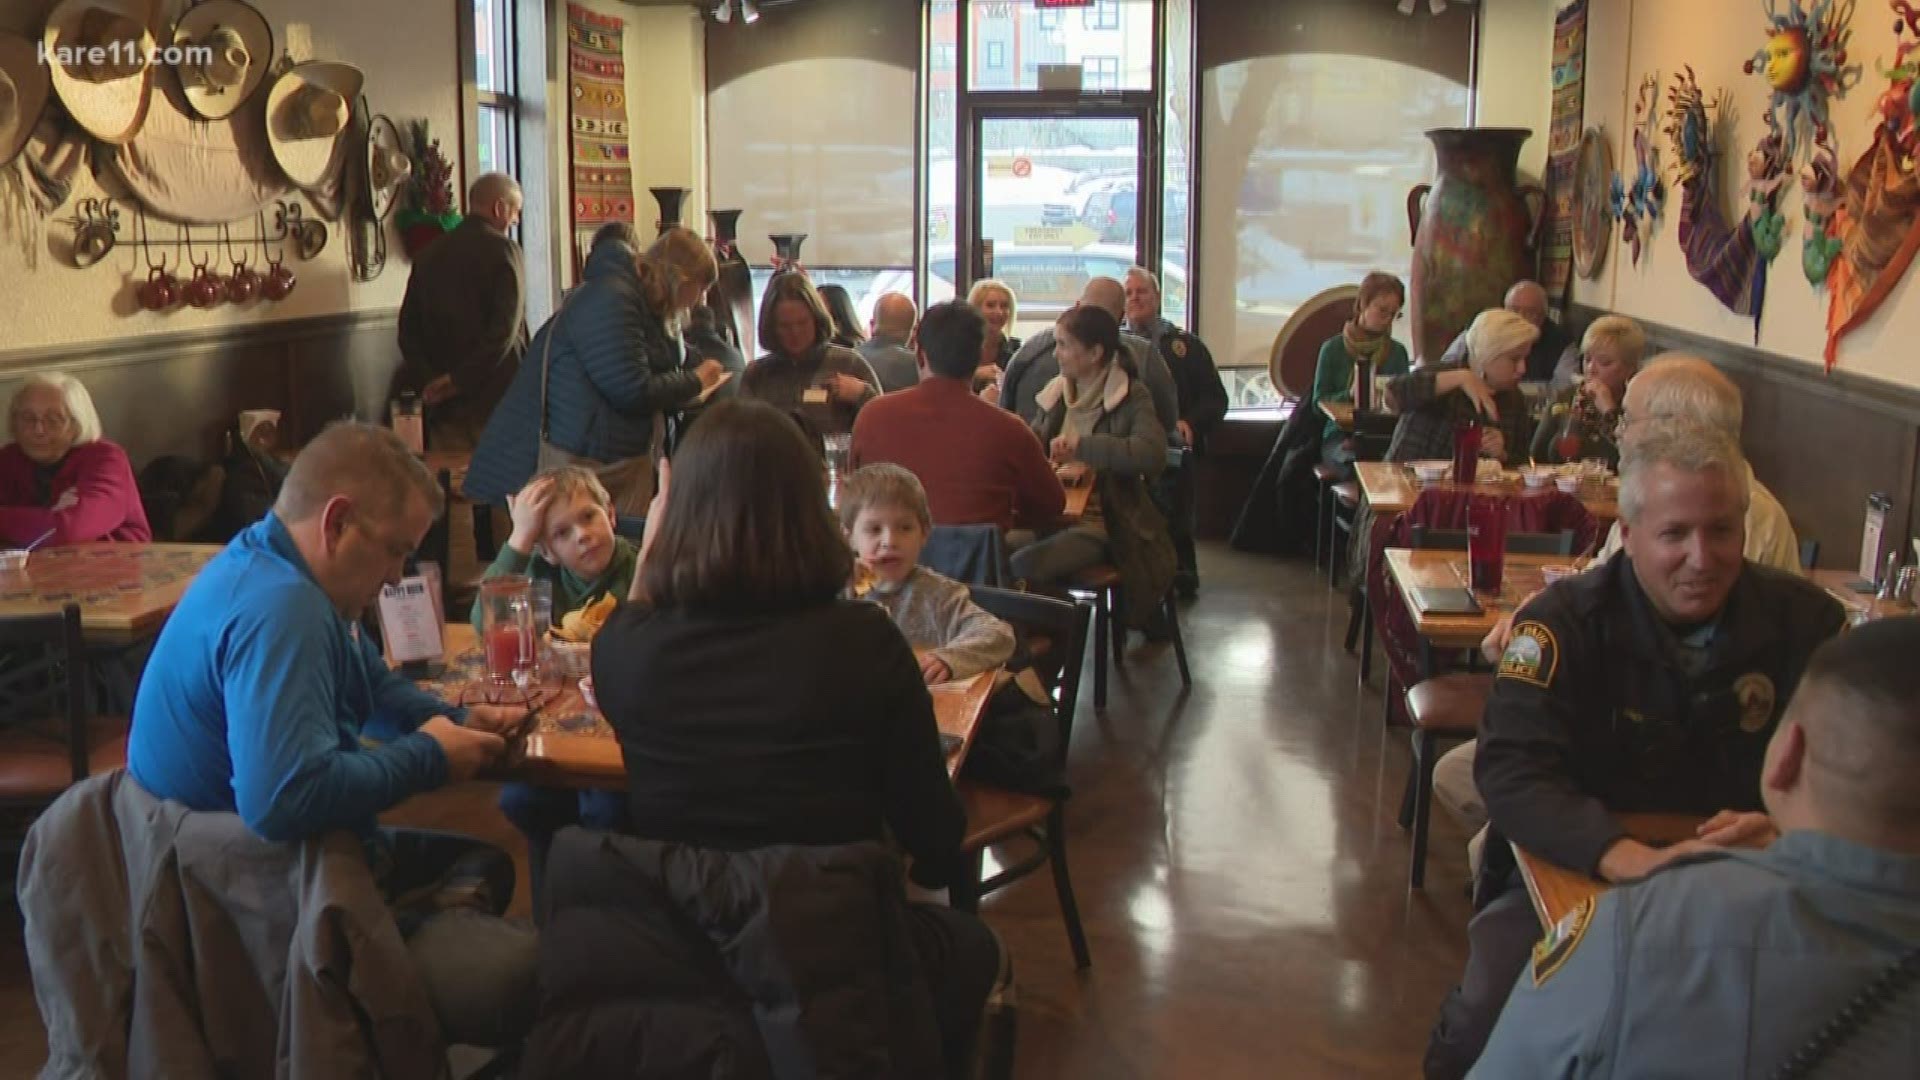 Several hundred packed a beloved St. Paul restaurant tonight in the aftermath of a scary armed robbery.